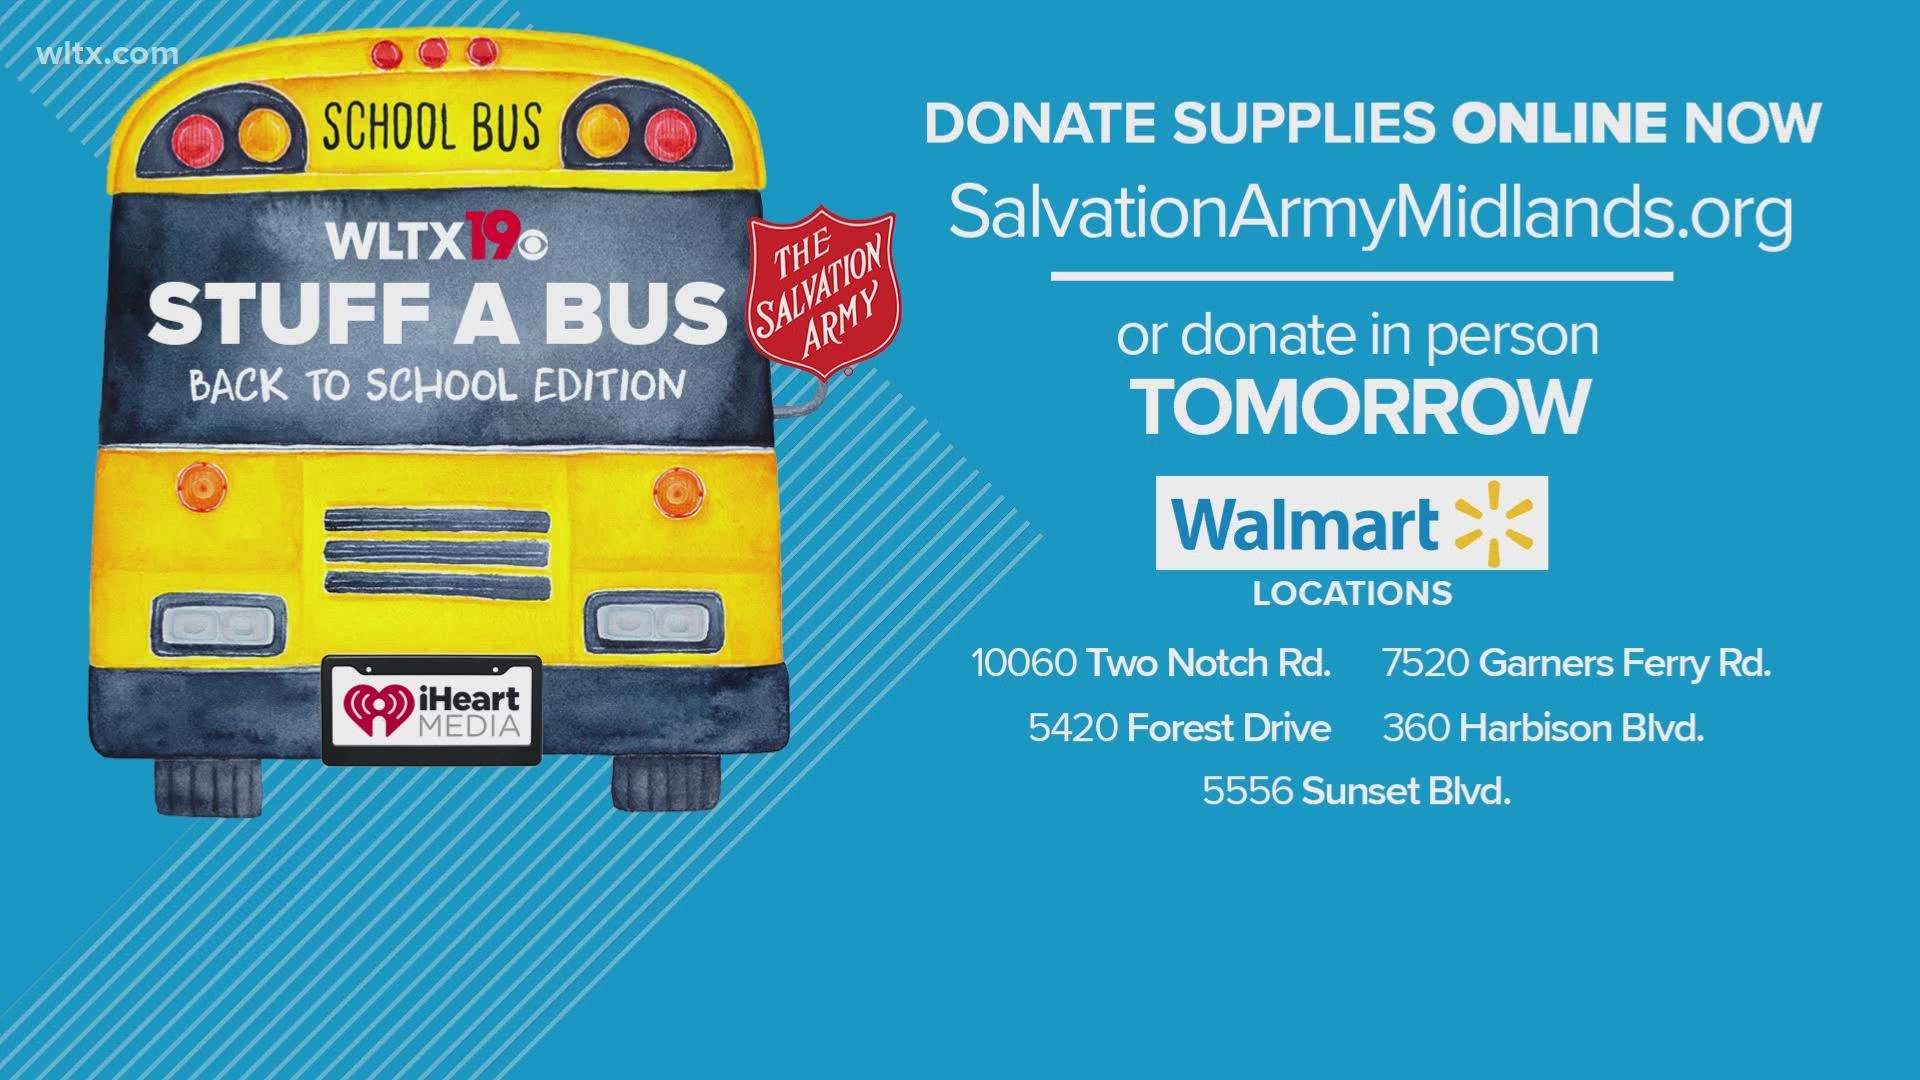 Help us stuff a bus full of school supplies for Midlands kids in need as the new school year begins.